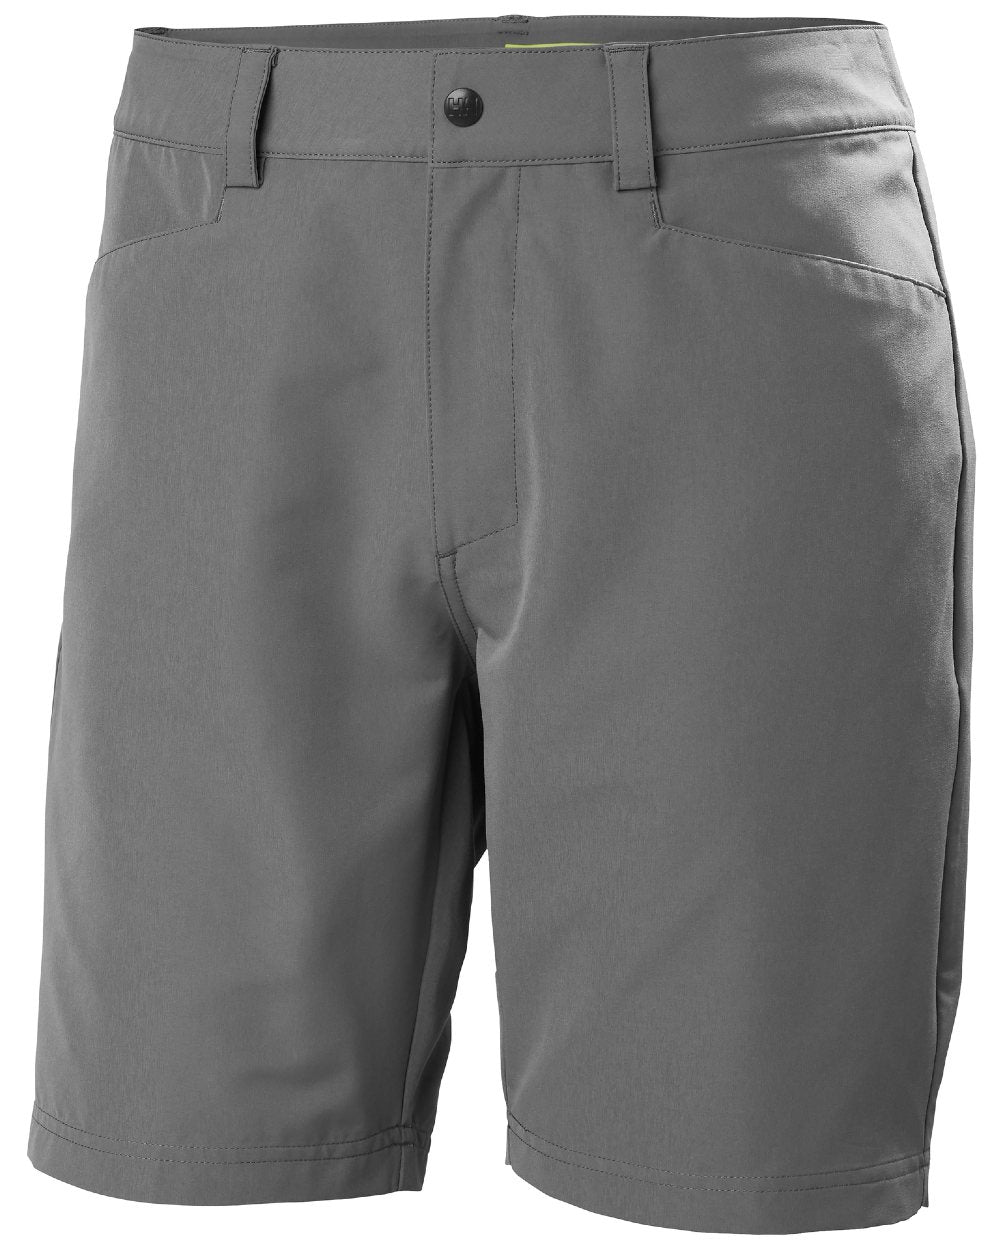 Quiet Shade coloured Helly Hansen Mens HP Quick Dry 10 inch Club Shorts 2.0 on white background 